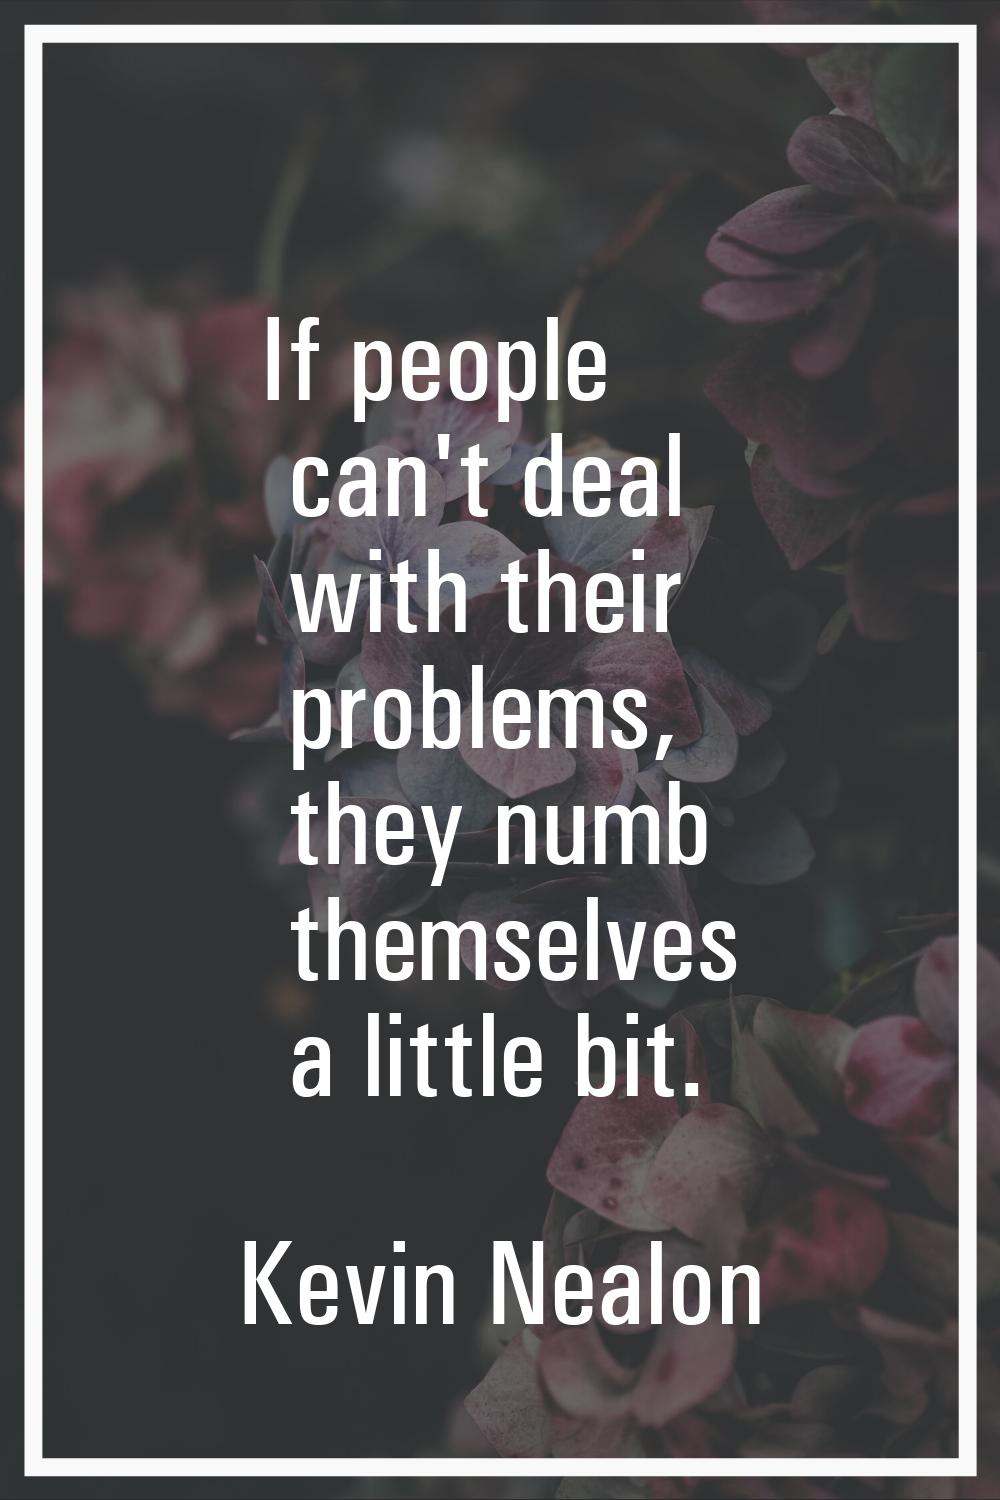 If people can't deal with their problems, they numb themselves a little bit.